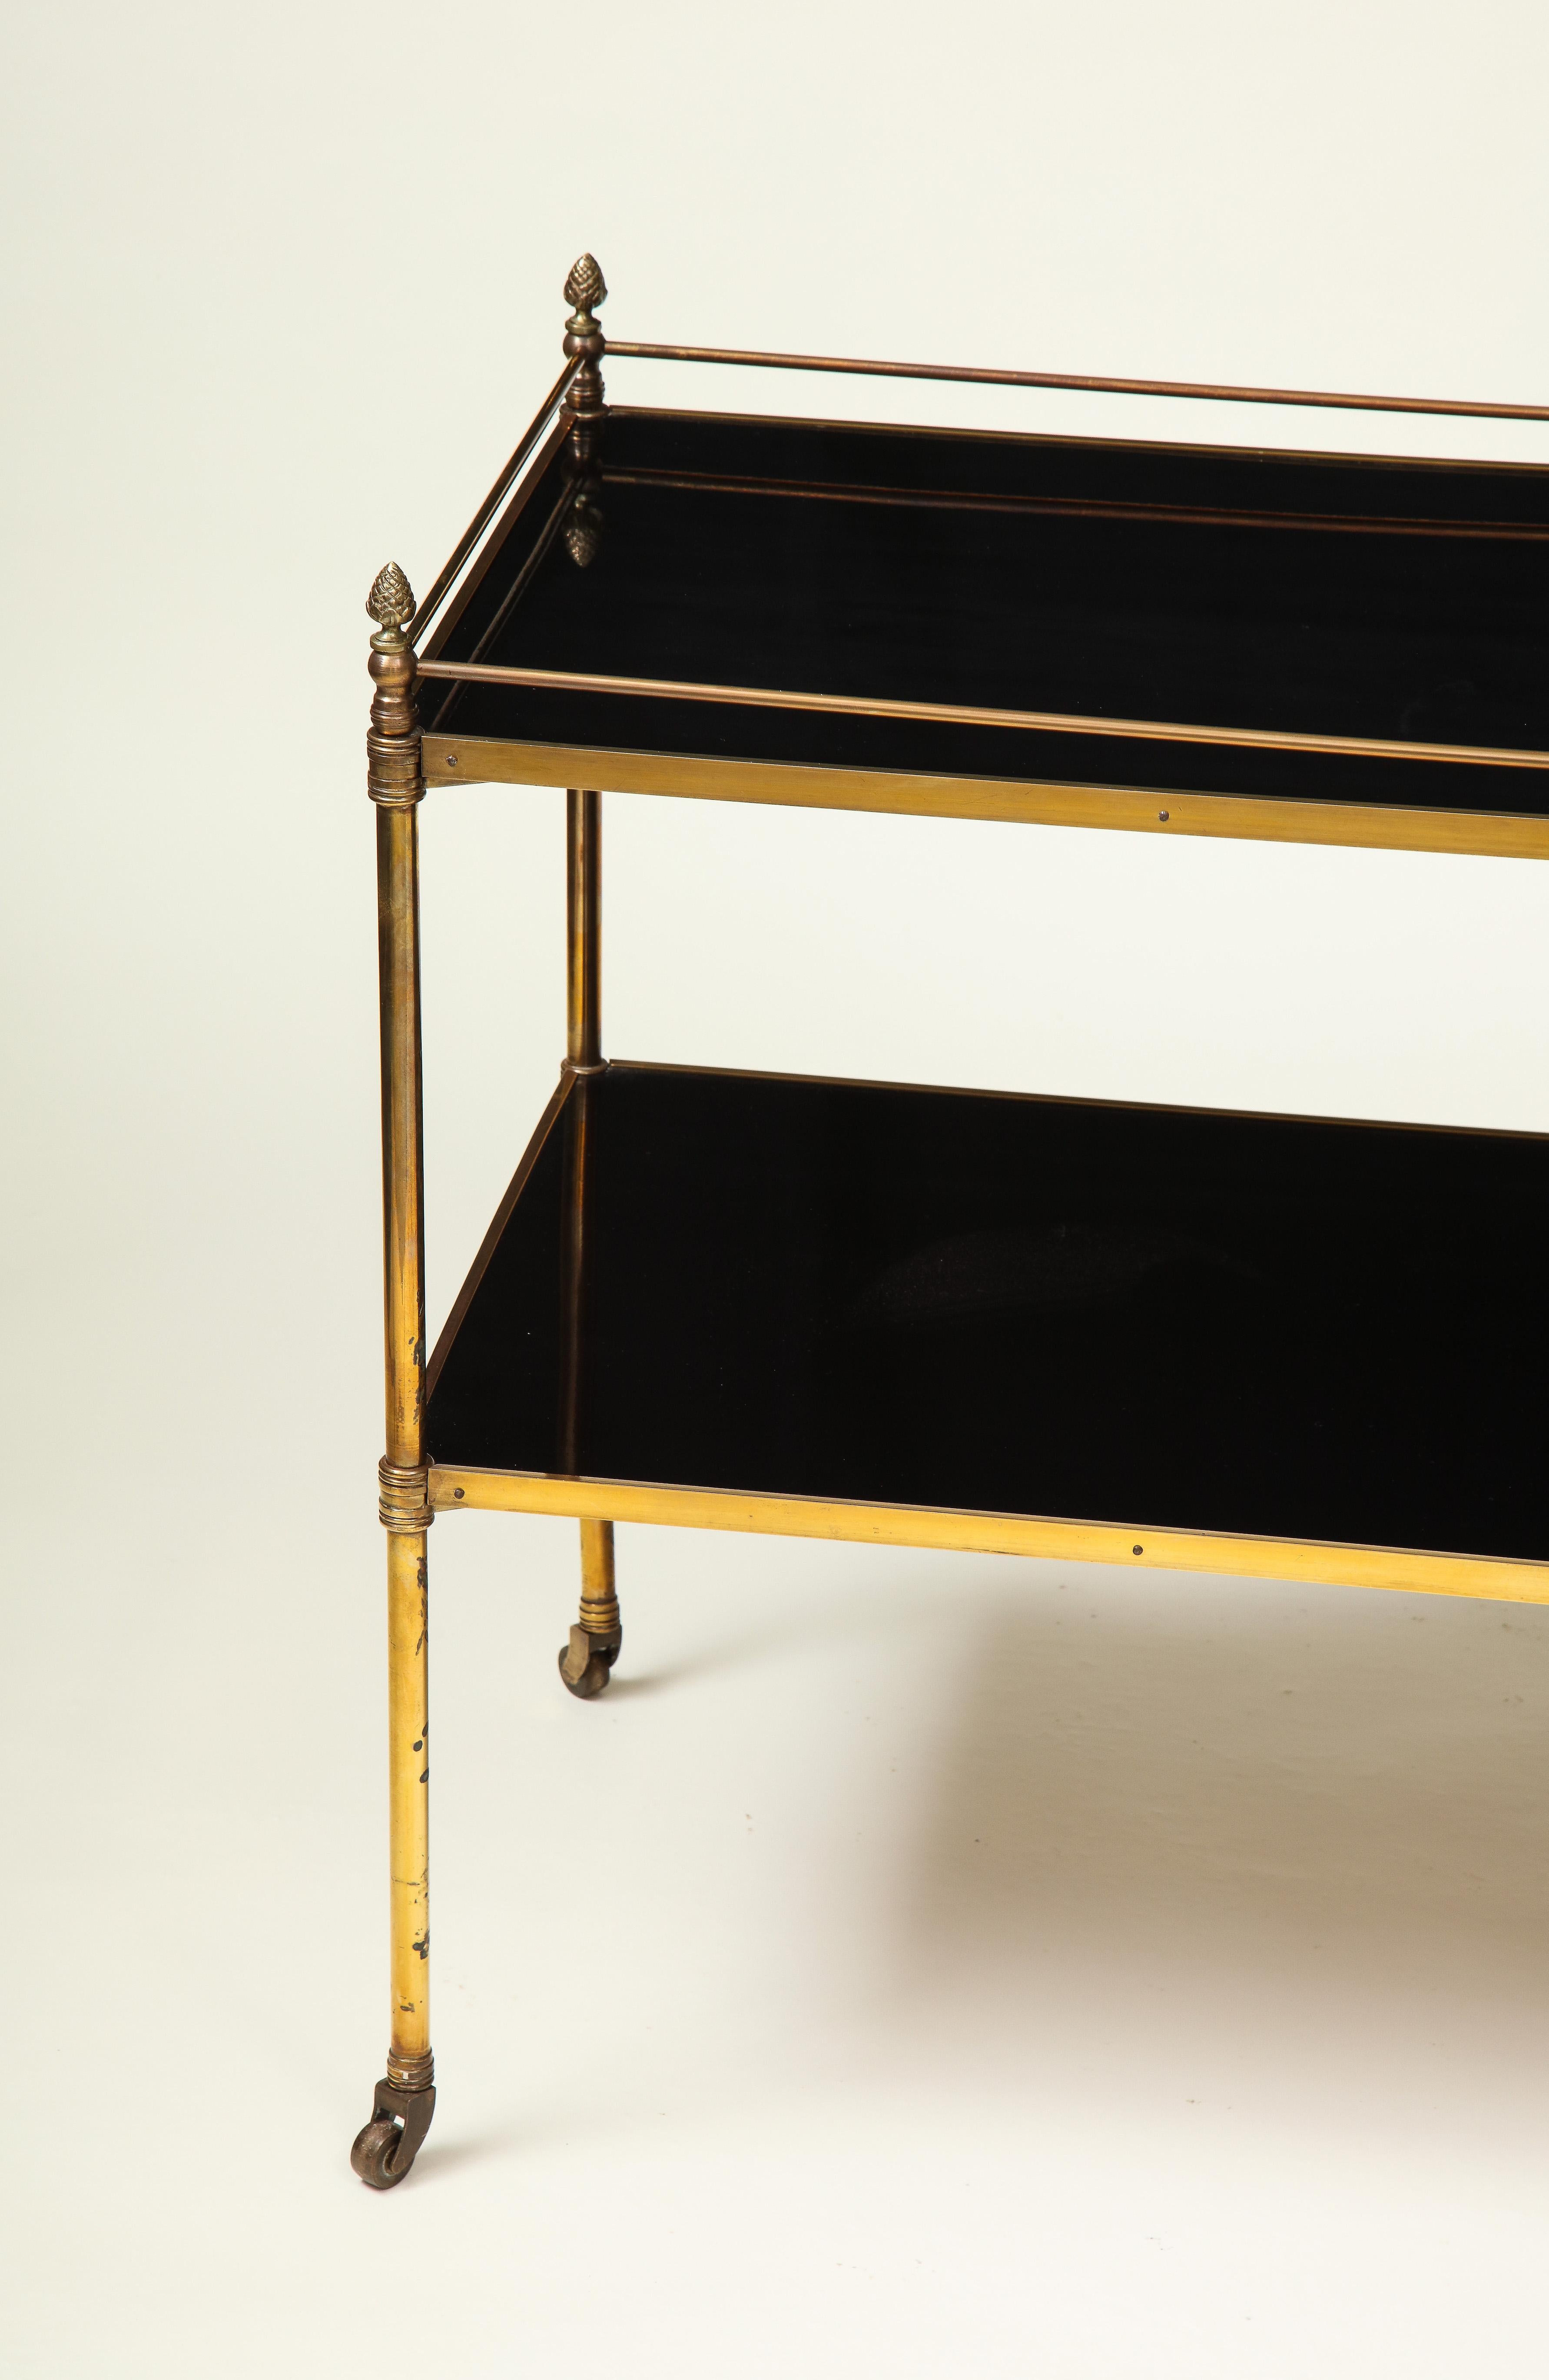 With two long rectangular black glass brass-bound shelves raised on turned uprights surmounted by pine cone finials; on brass casters.

Provenance: From the Collection of Mario Buatta, New York, NY.